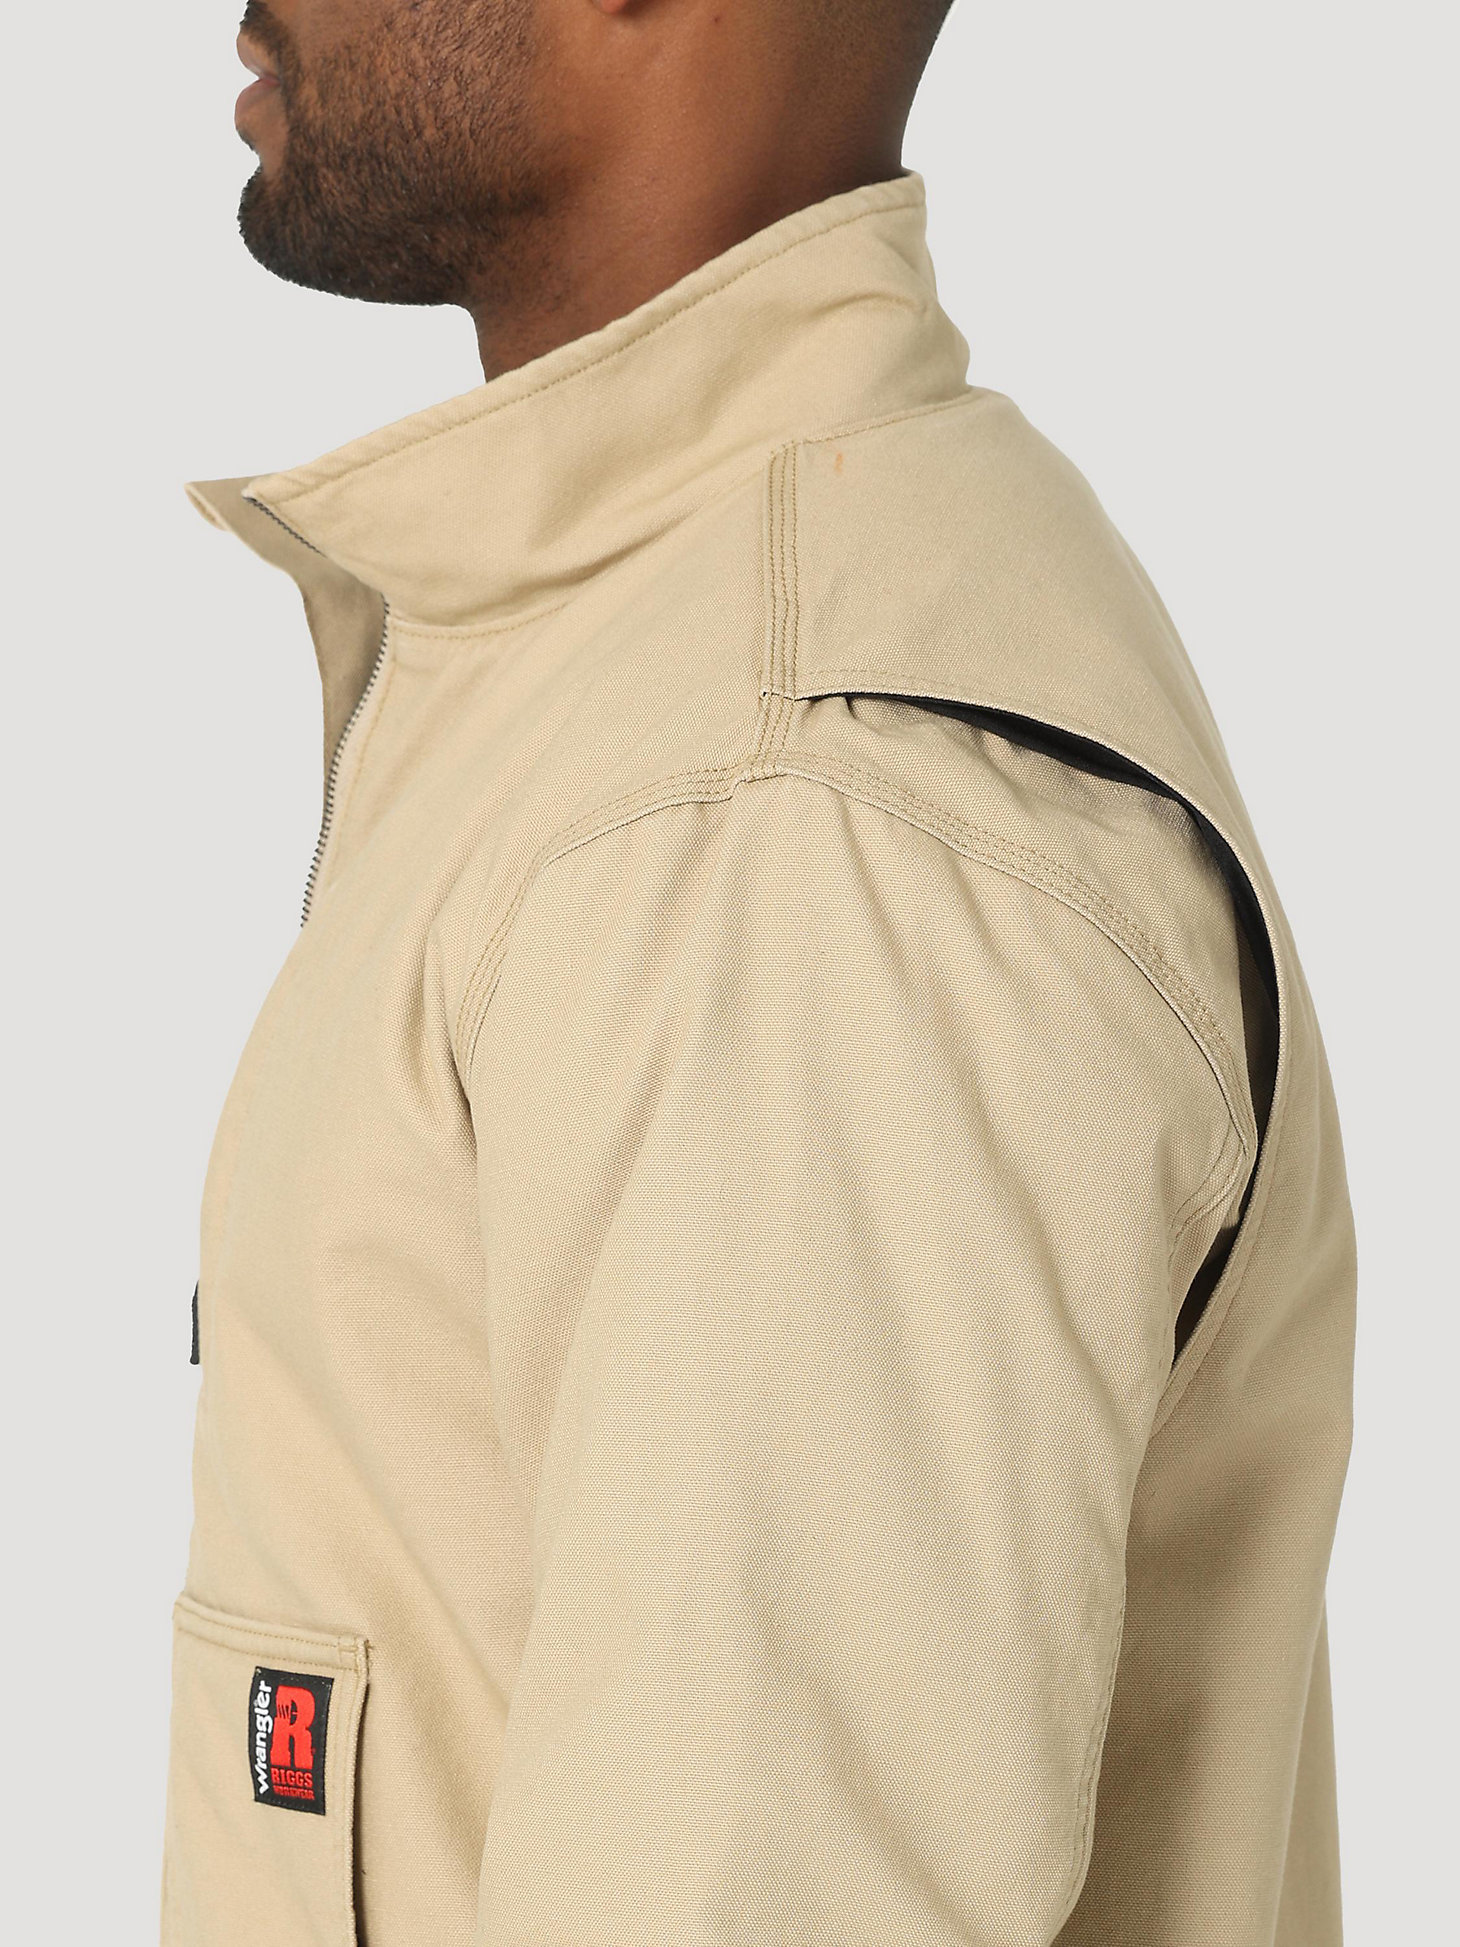 RIGGS Tough Layers Sherpa Lined Canvas Jacket in Golden Khaki alternative view 5